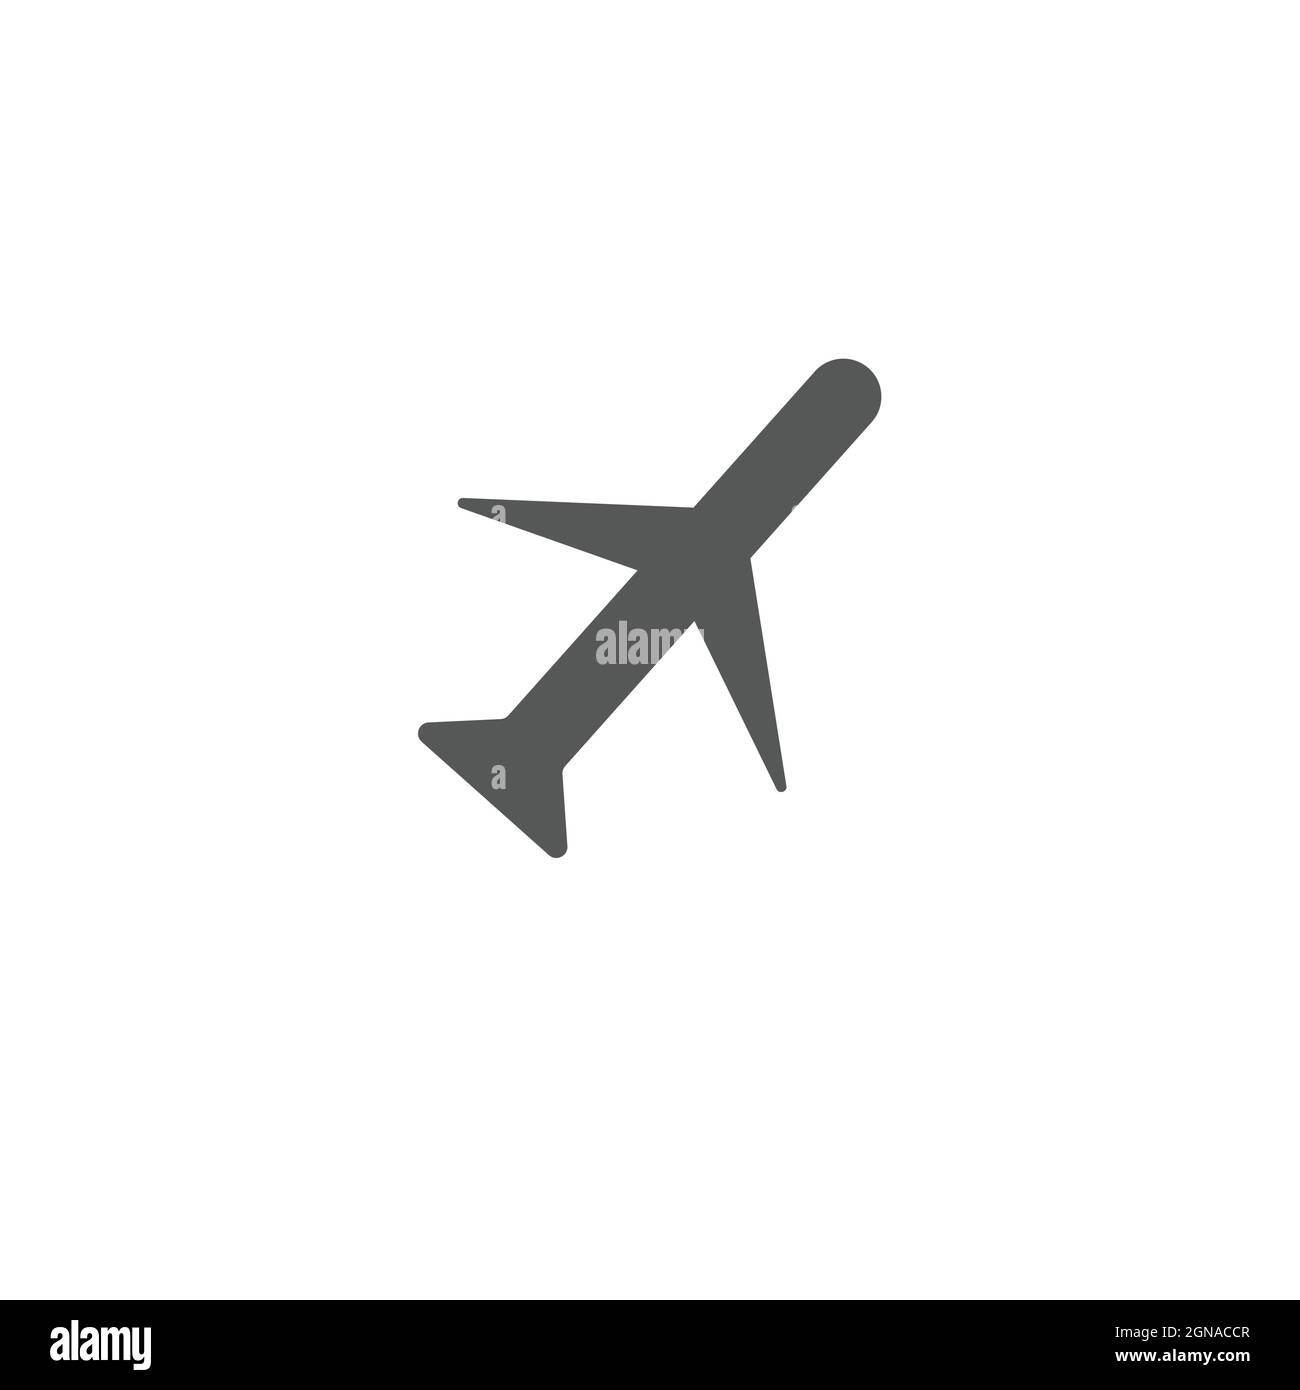 Airline Icon Vector Illustration, Airplane Symbol Stock Vector